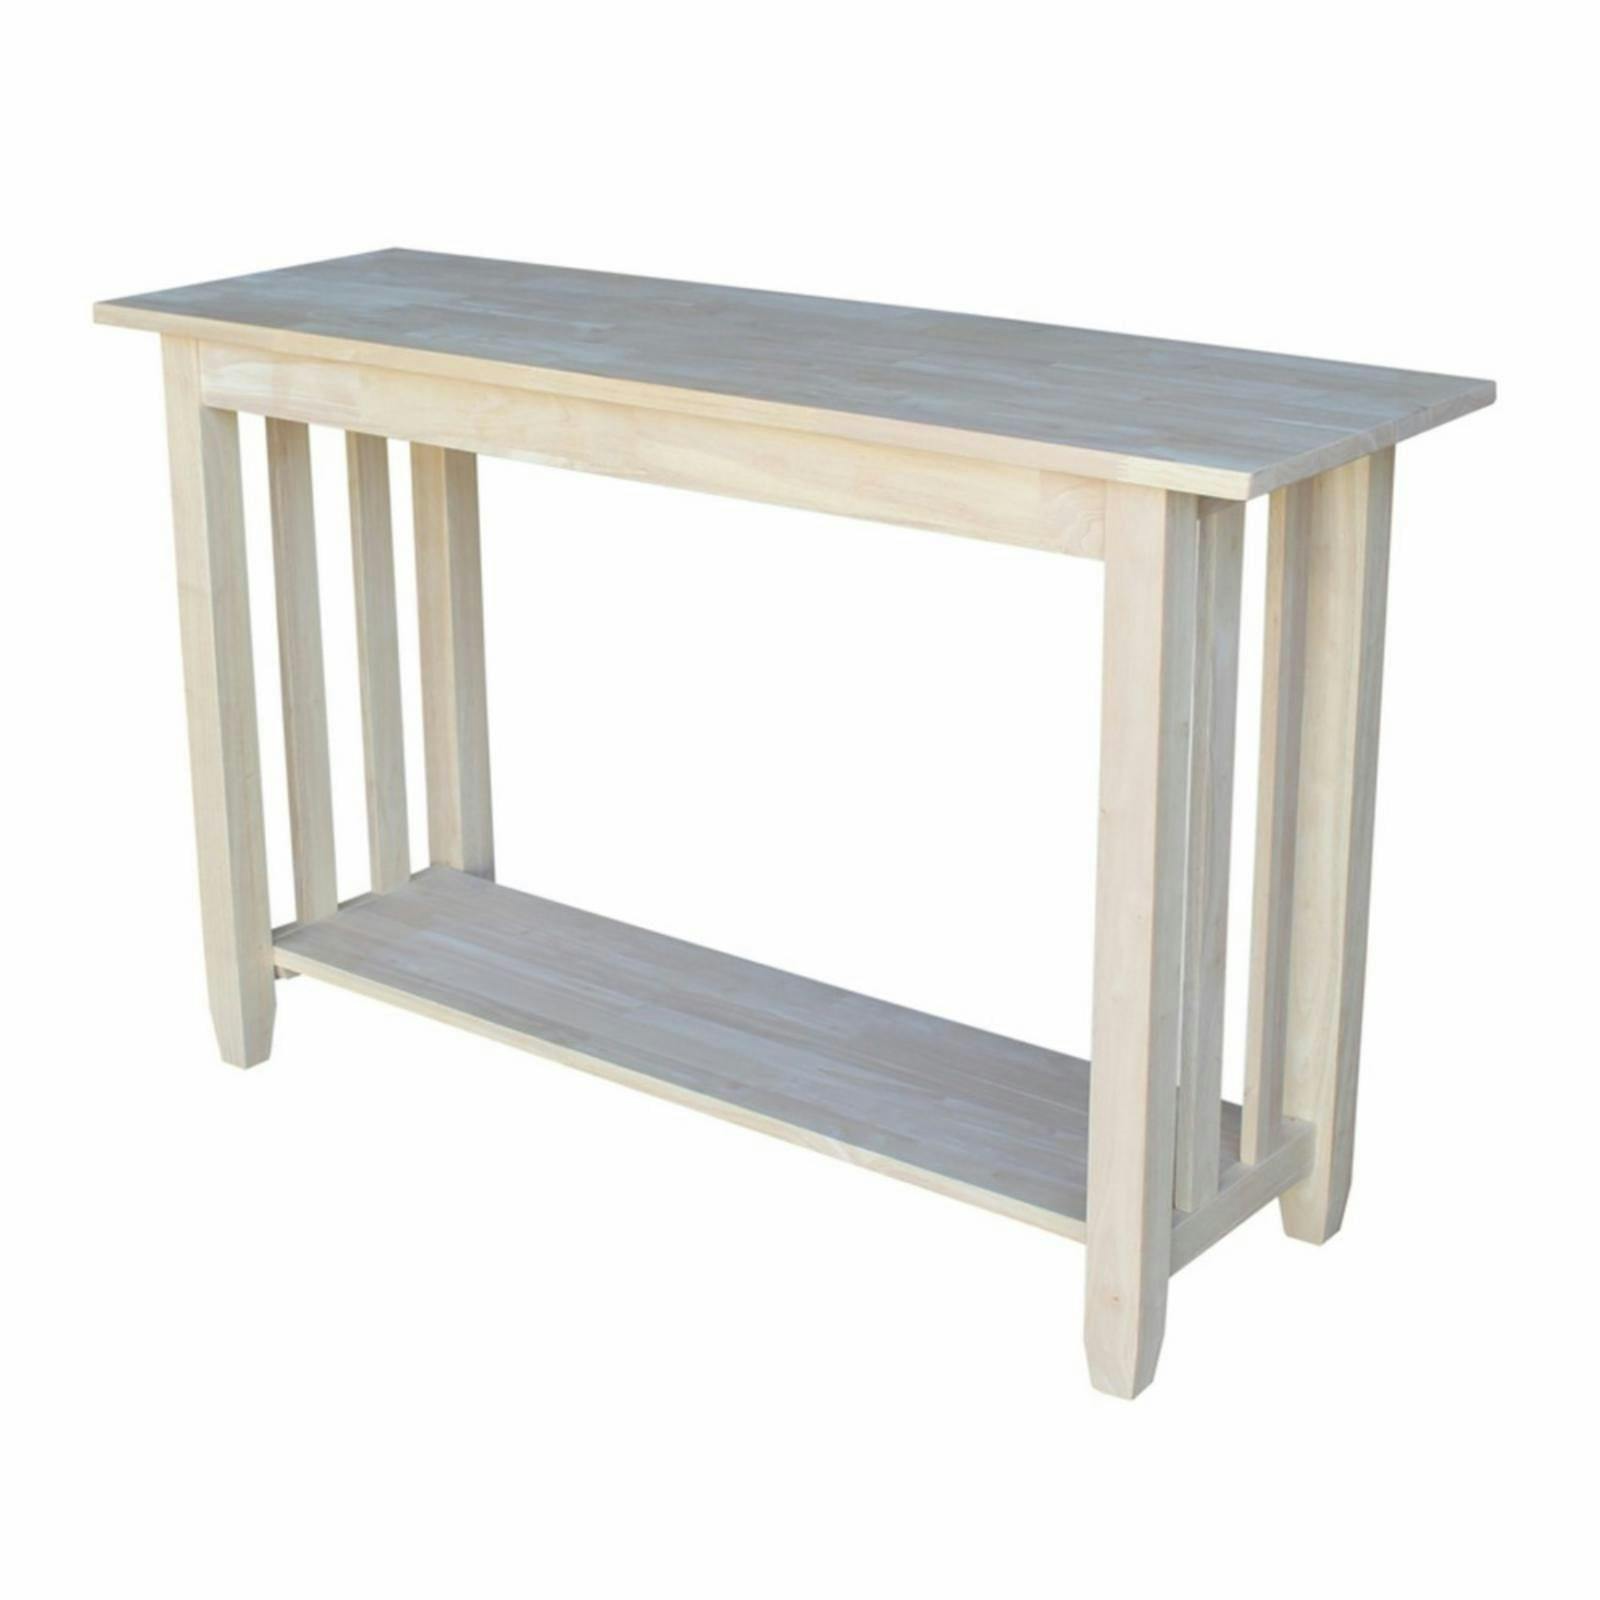 Mission Unfinished Wood Rectangular Console Table with Storage